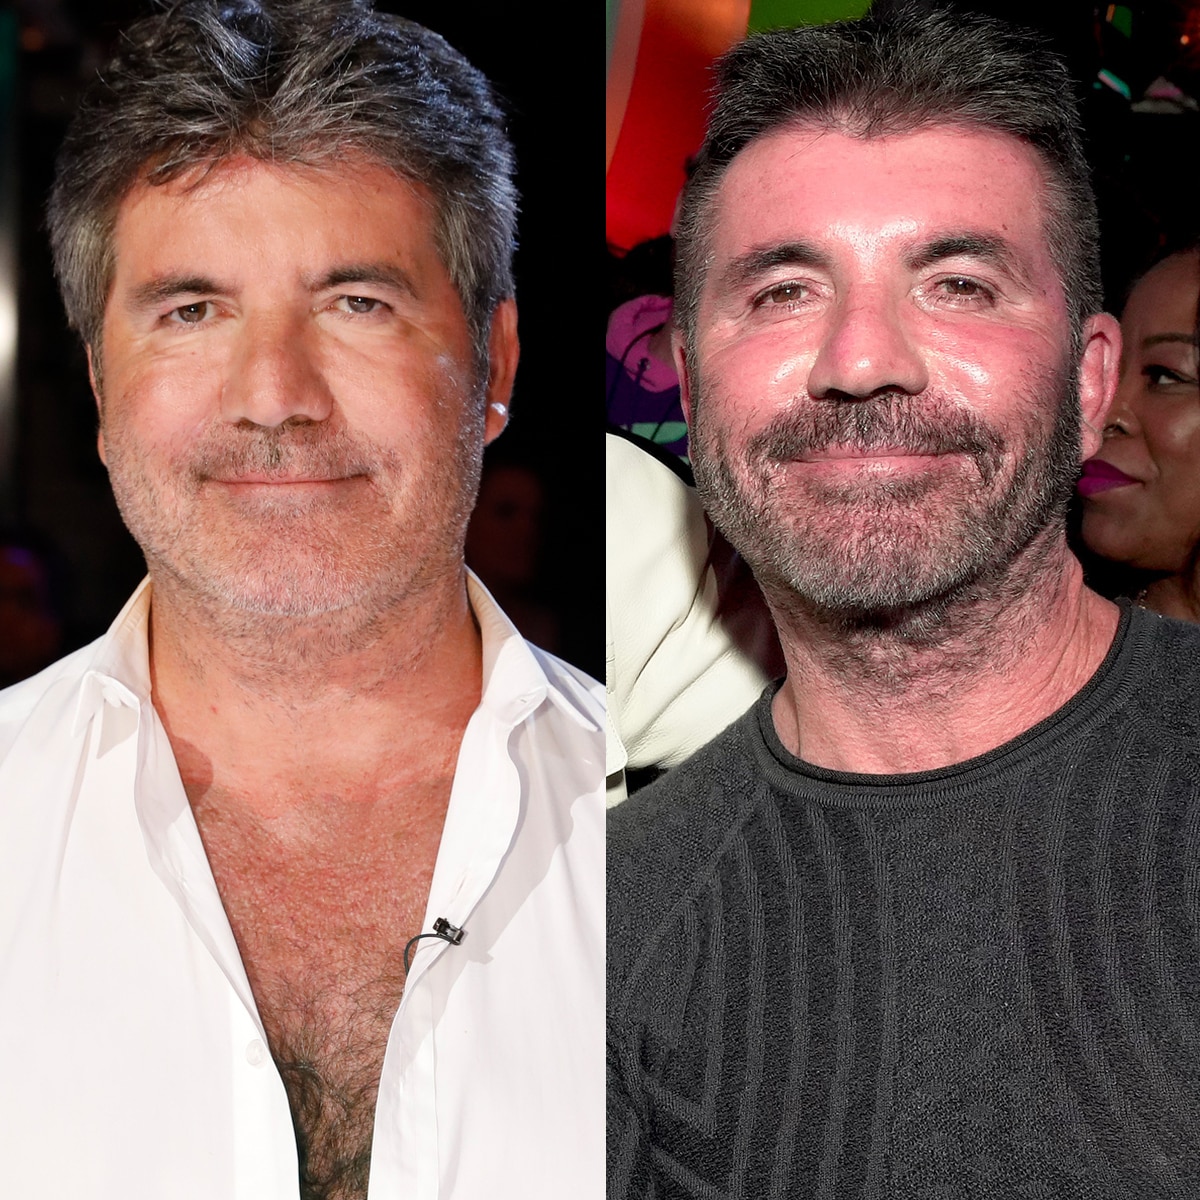 Simon Cowell Removes His Face Fillers After Saying He Went “Too Far”